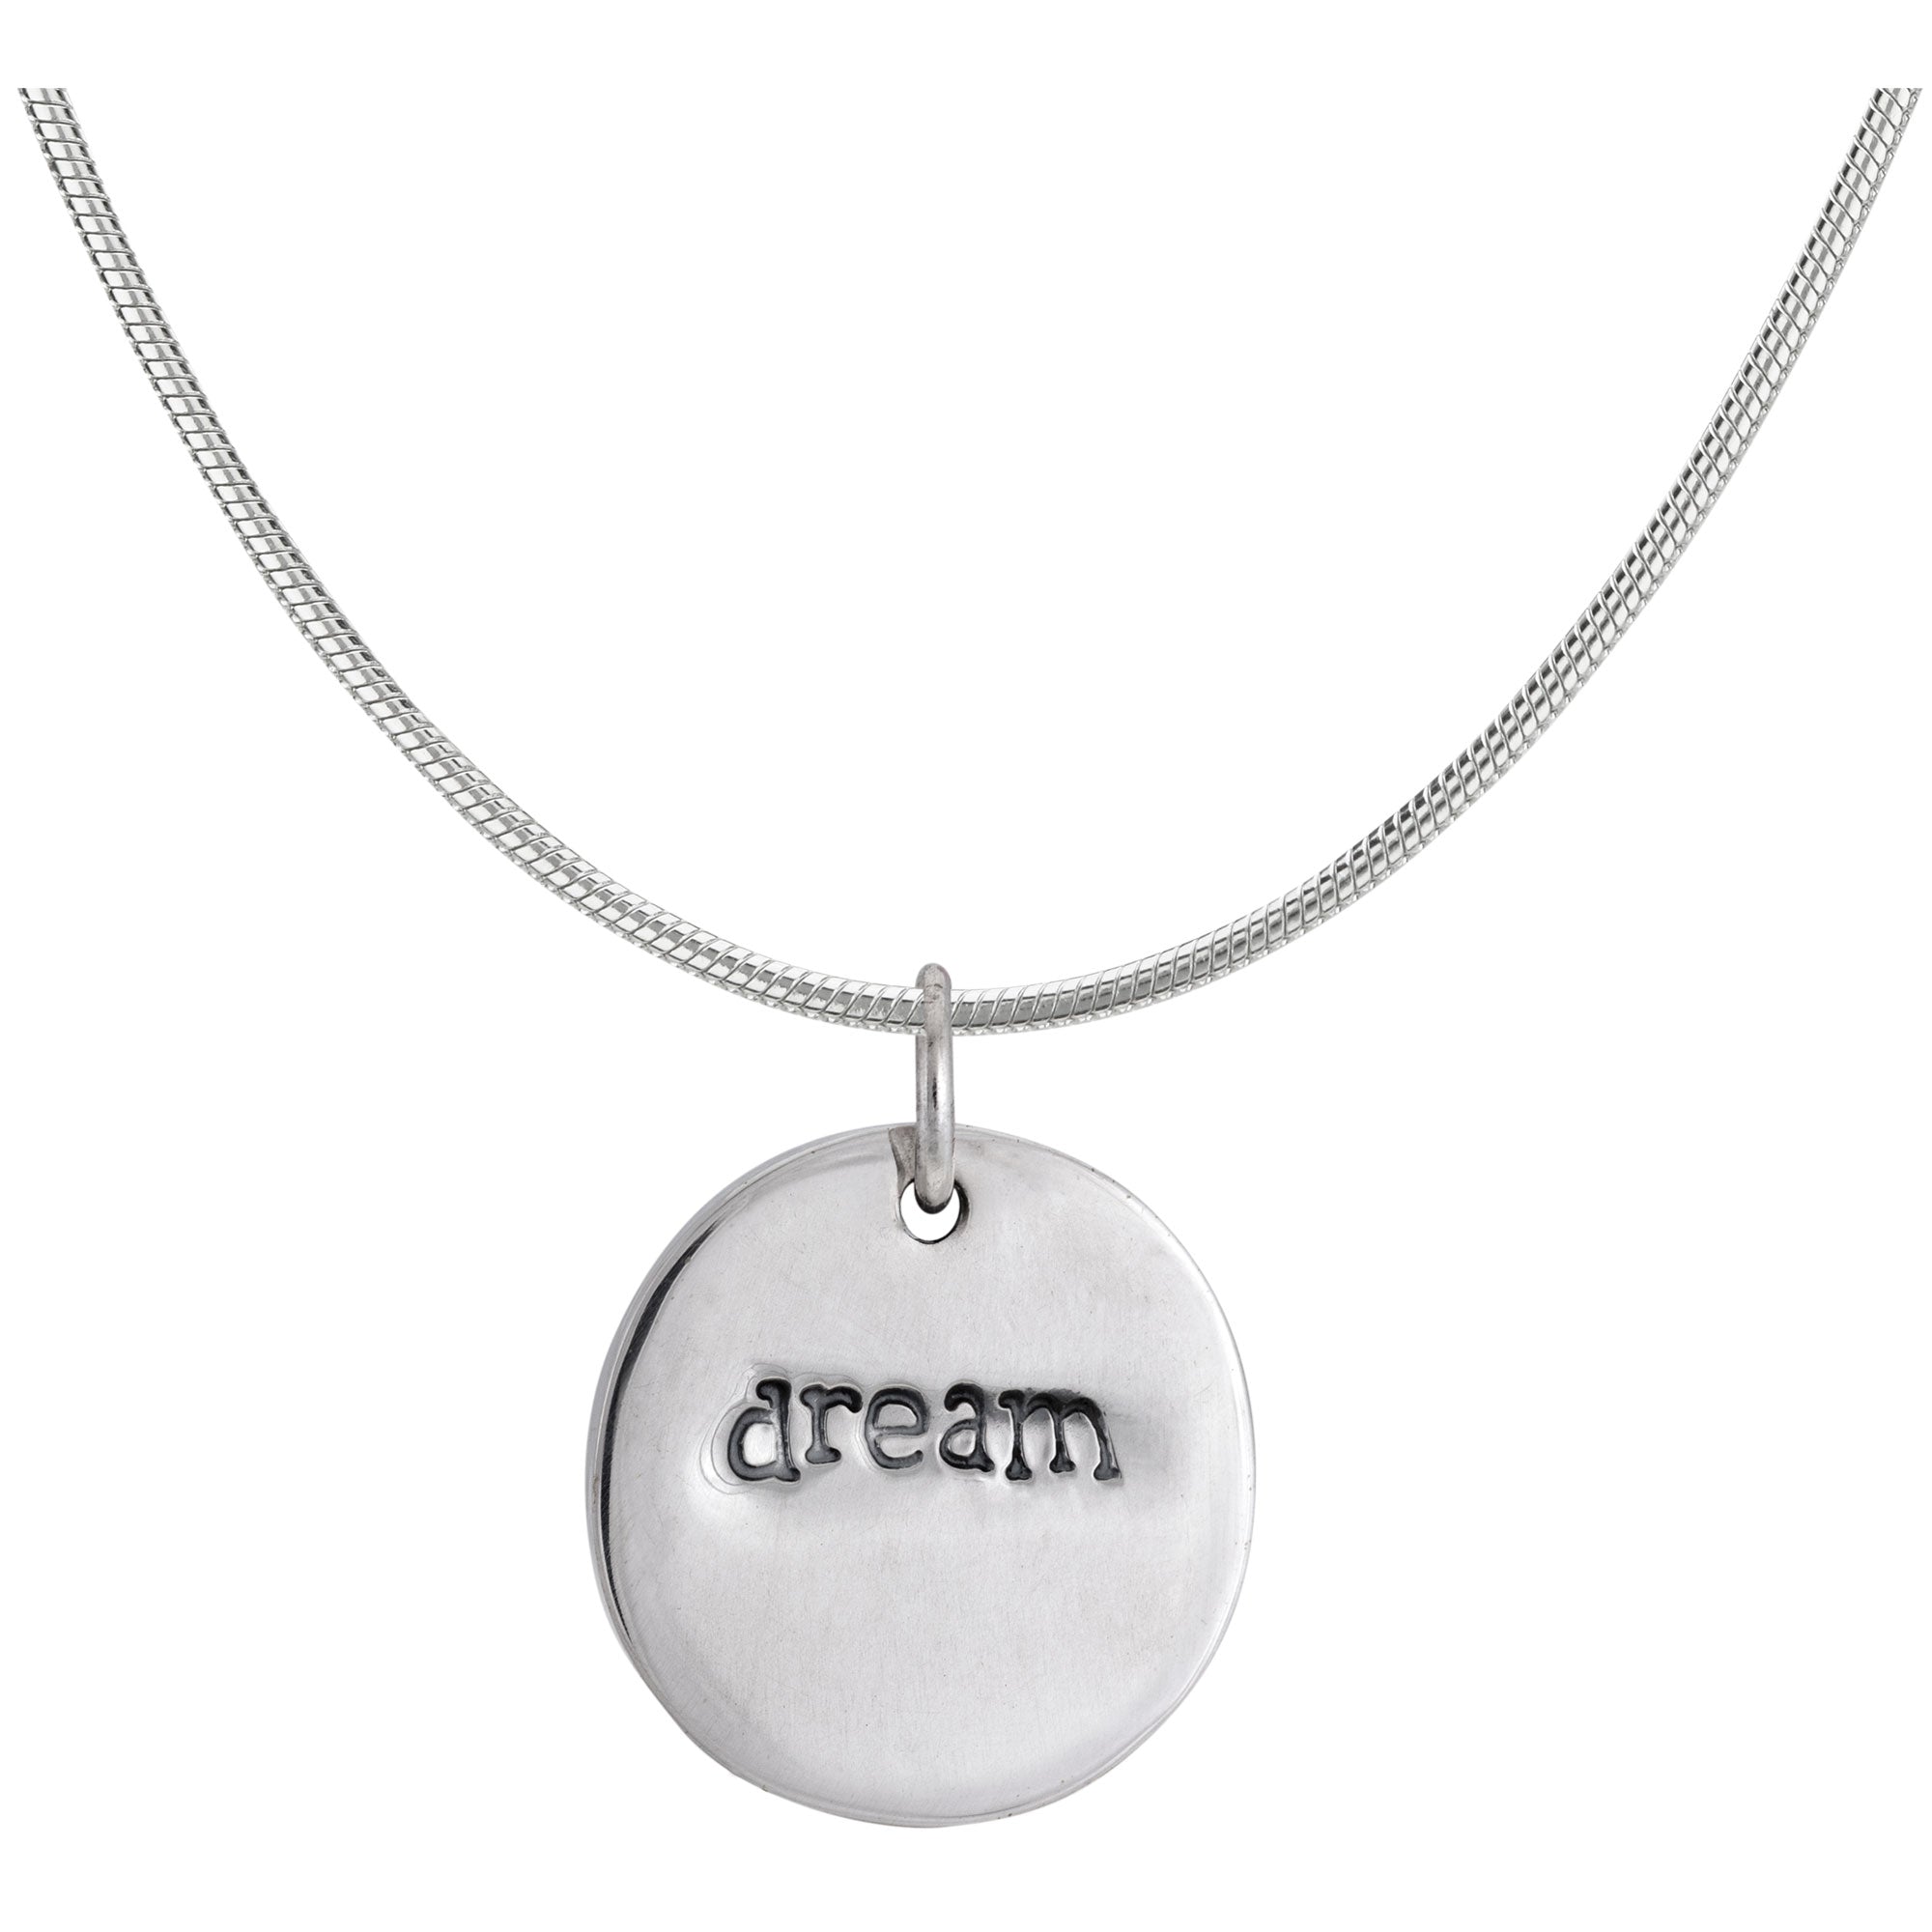 Believe Dream Double Sided Sterling Necklace - With Sterling Cable Chain